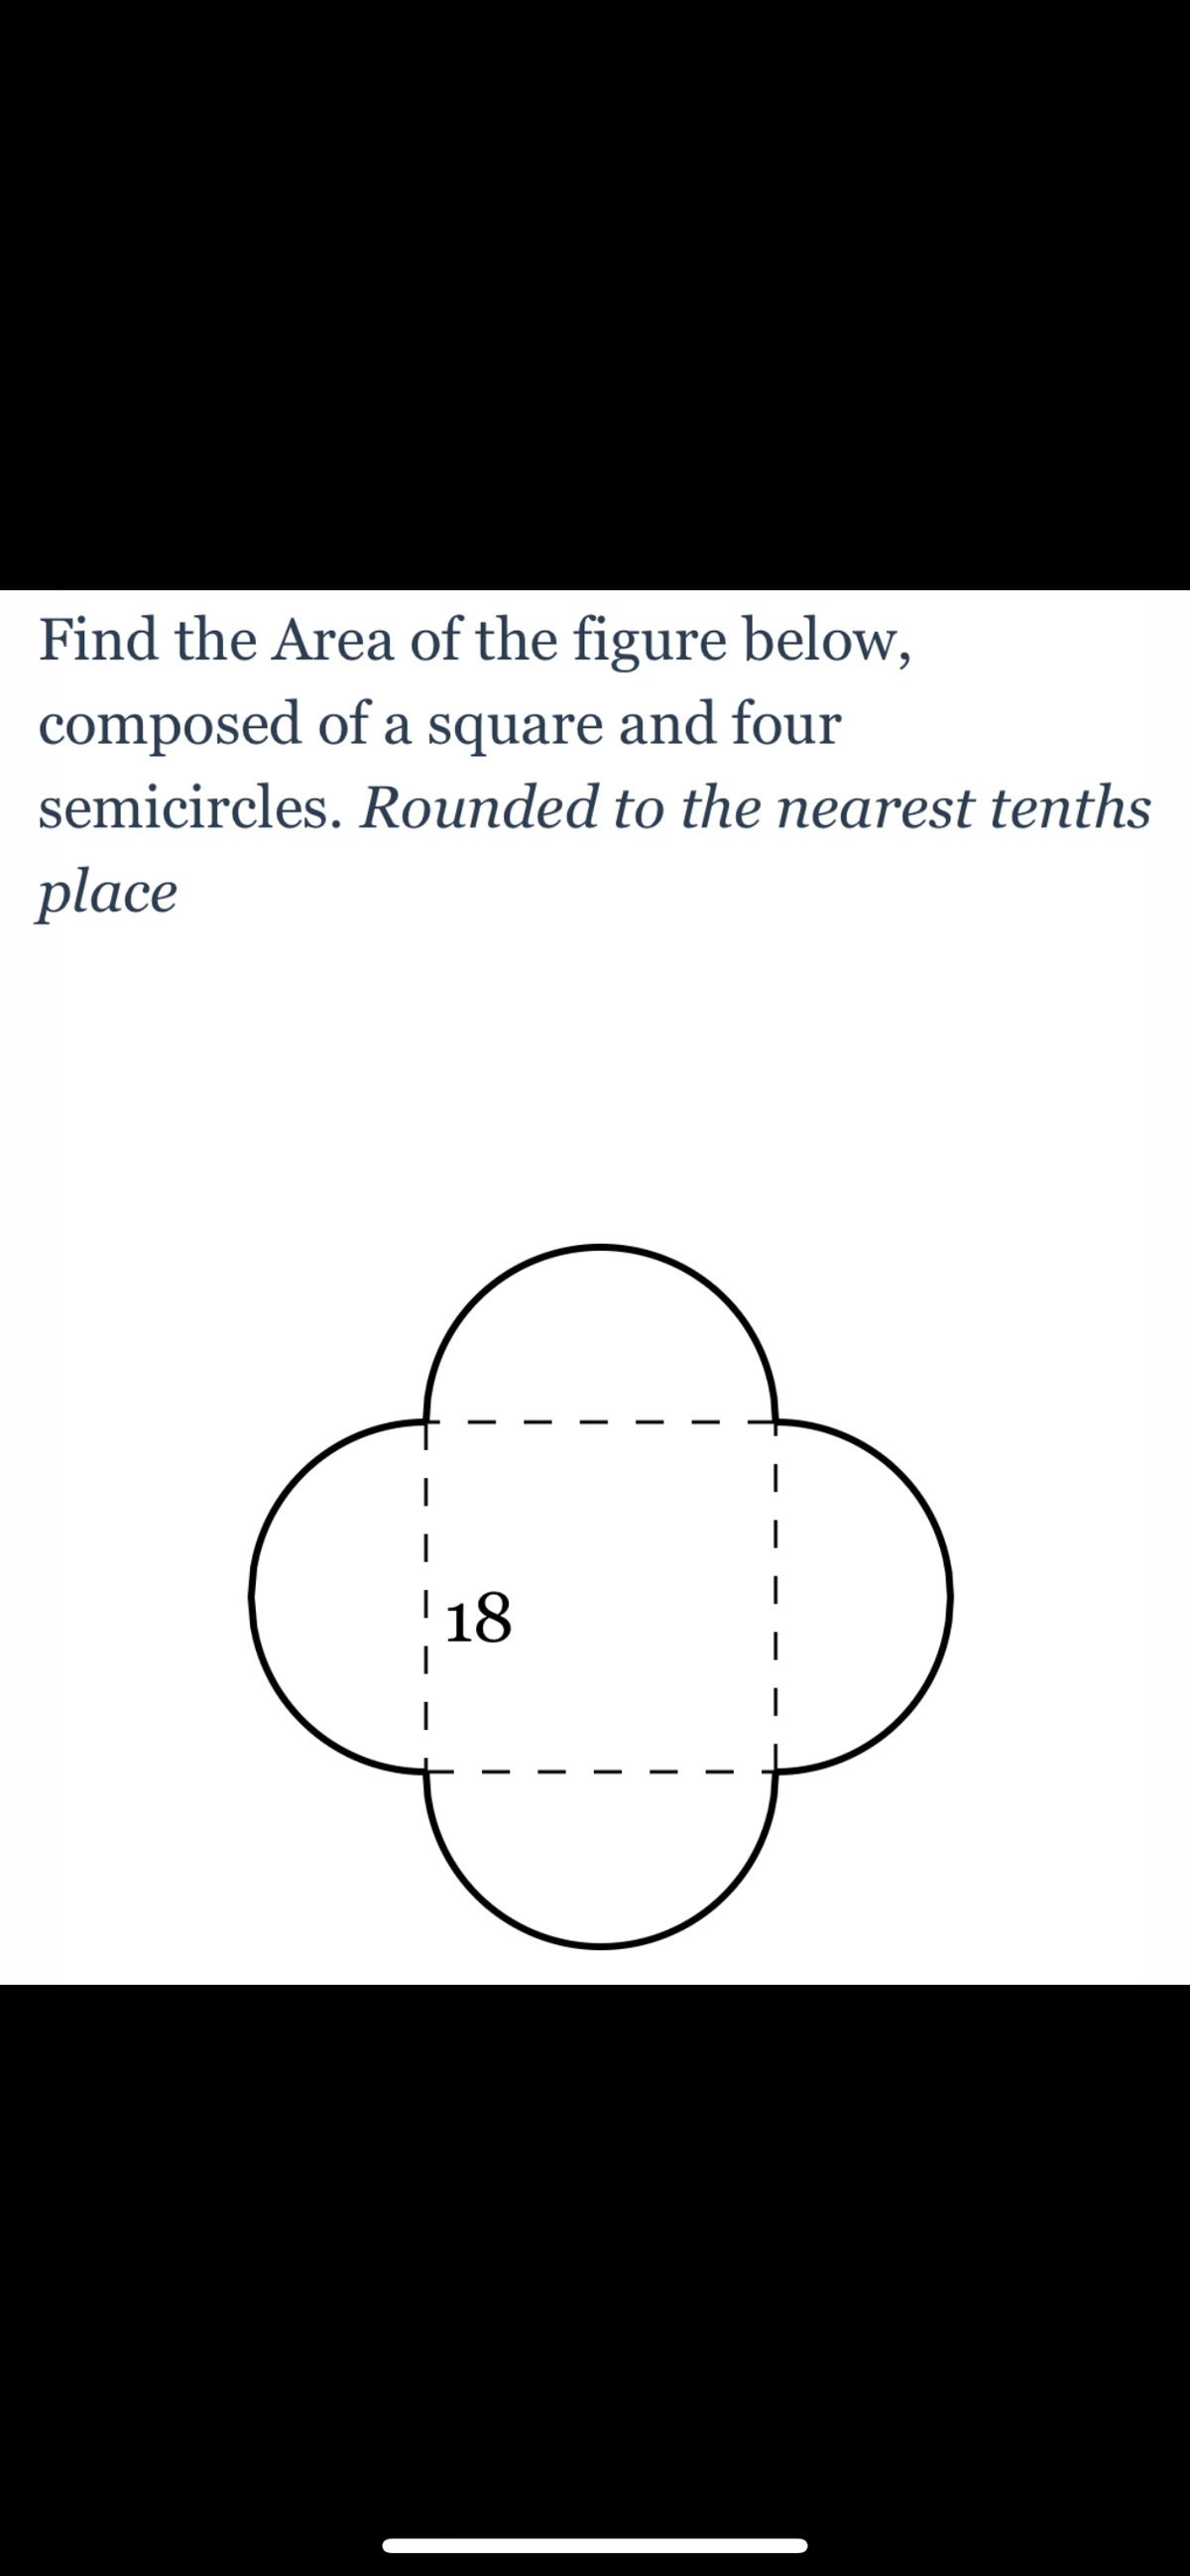 Find the Area of the figure below,
composed of a square and four
semicircles. Rounded to the nearest tenths
place
|
18